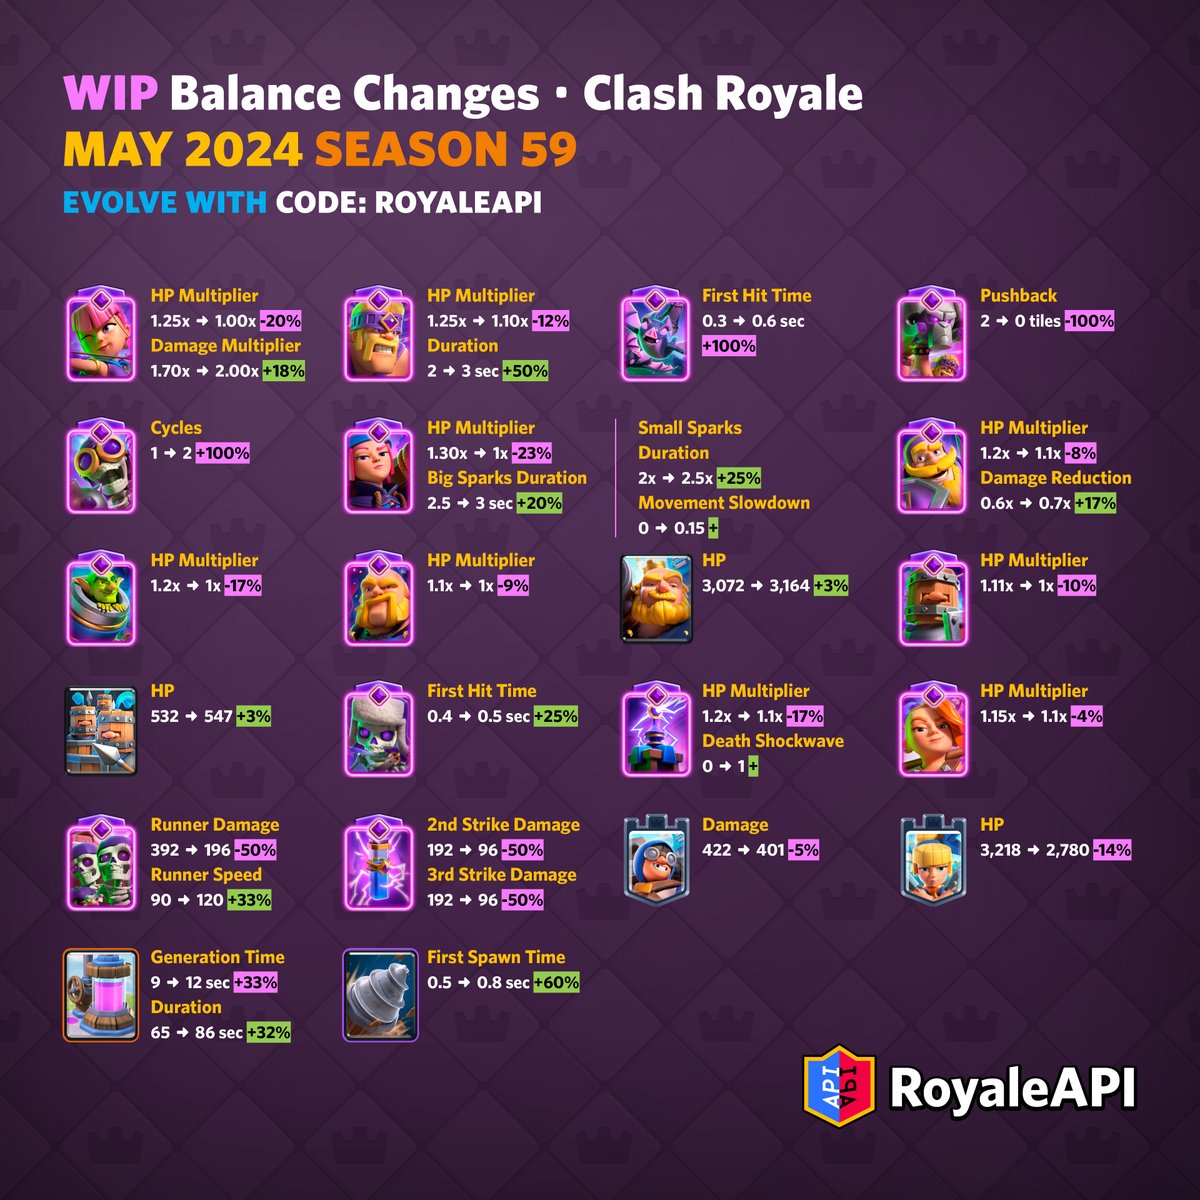 WIP Balance Changes for May 2024 (Season 59) in Clash Royale! on.royaleapi.com/s59bwip